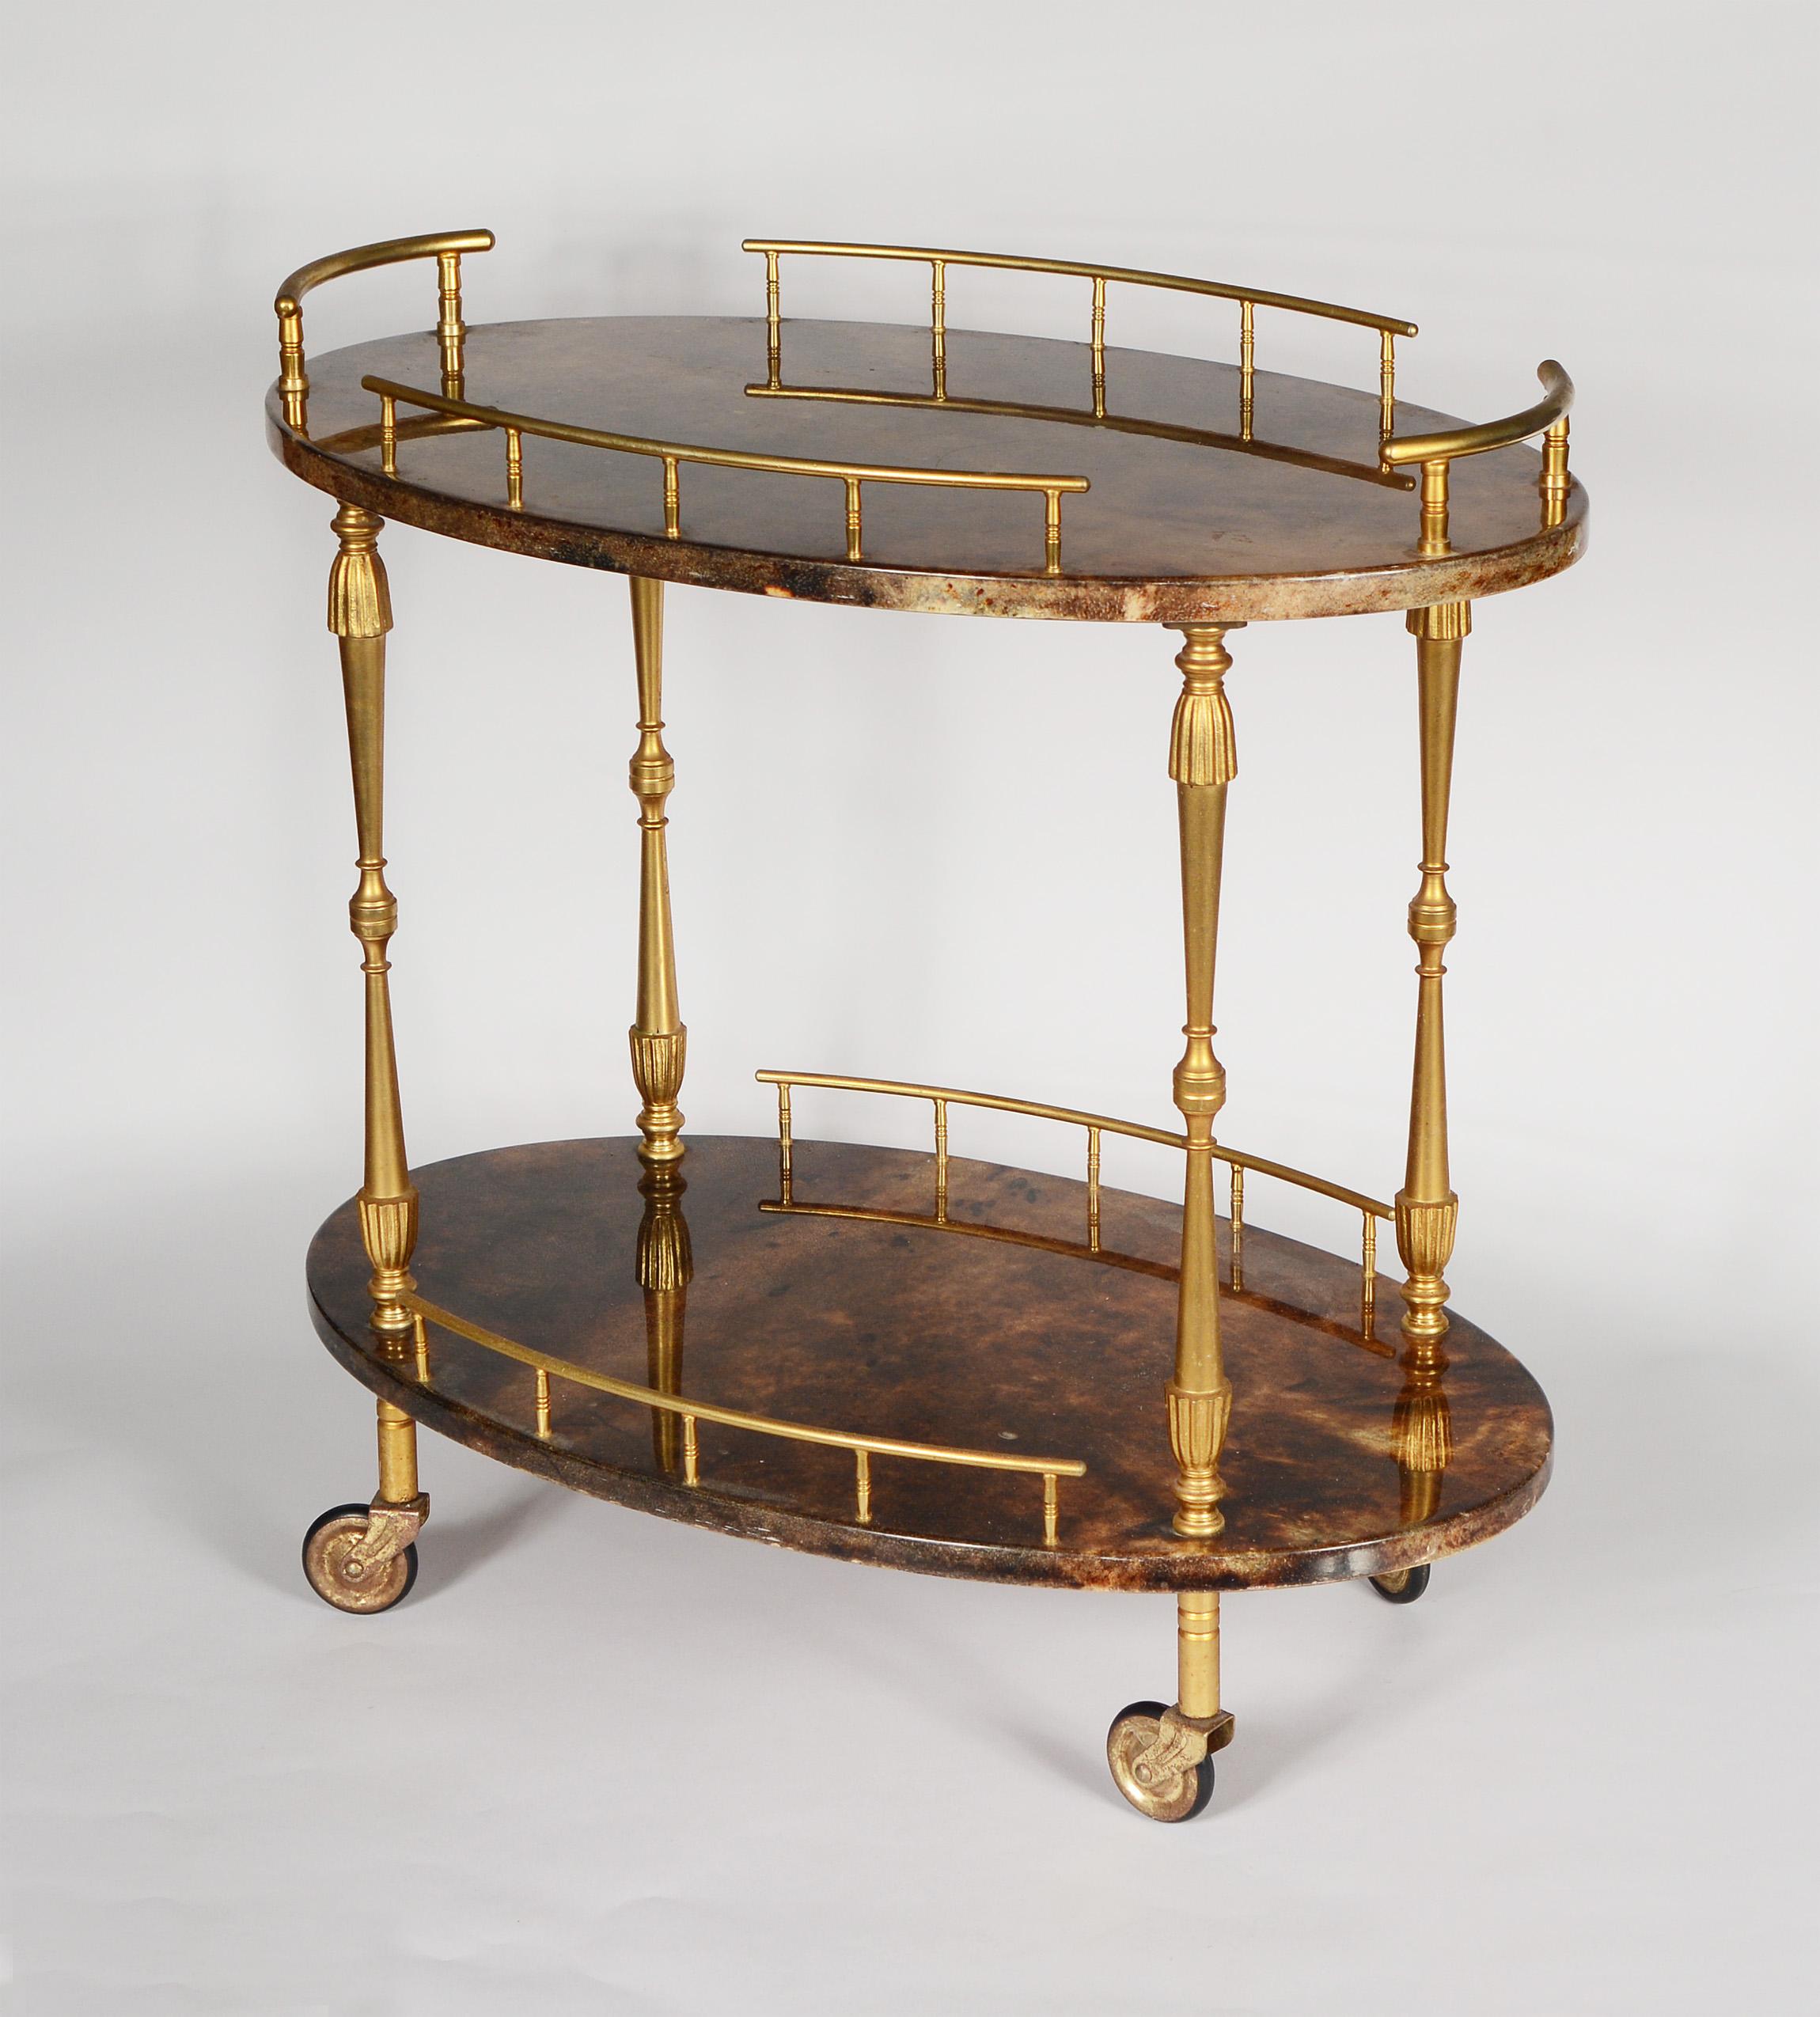 Aldo Tura bar cart with goatskin parchment and gold washed brass. This smaller size cart still has plenty of surface area for barware or decanters. This retains the label. There are a few dings to the resin on the parchment.